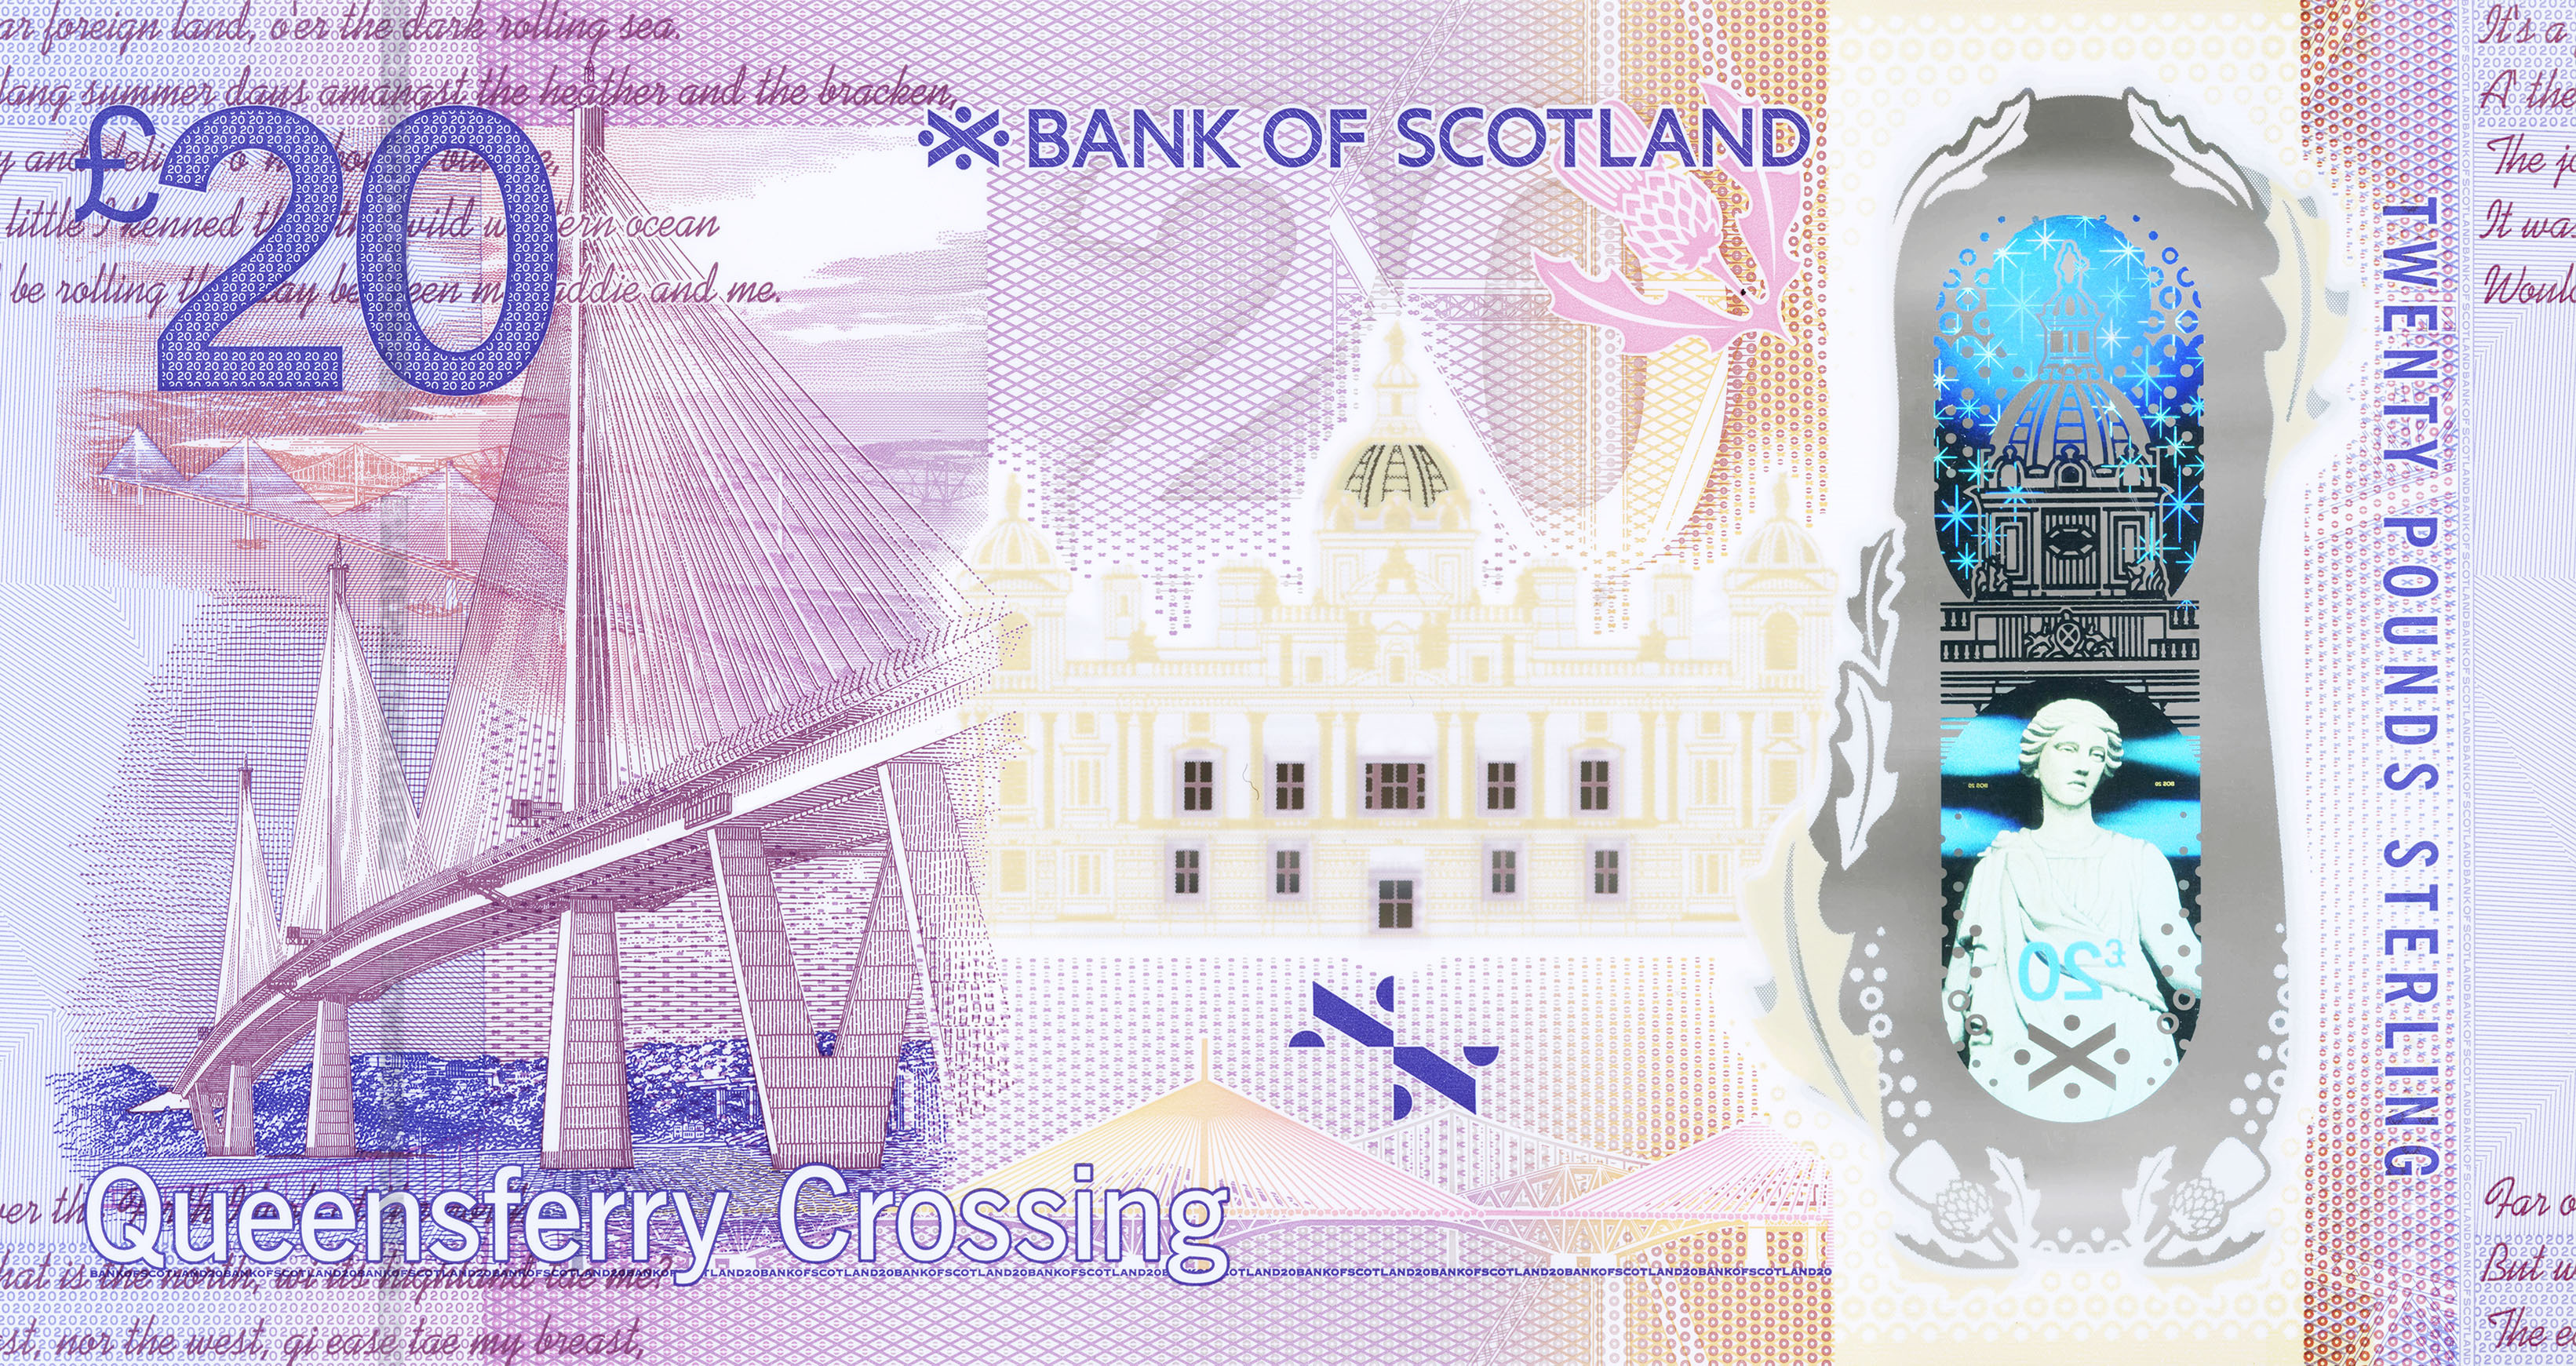 The back of the Bank of Scotland's new commemorative £20 banknote, which has been unveiled celebrating the Queensferry Crossing over the Firth of Forth.